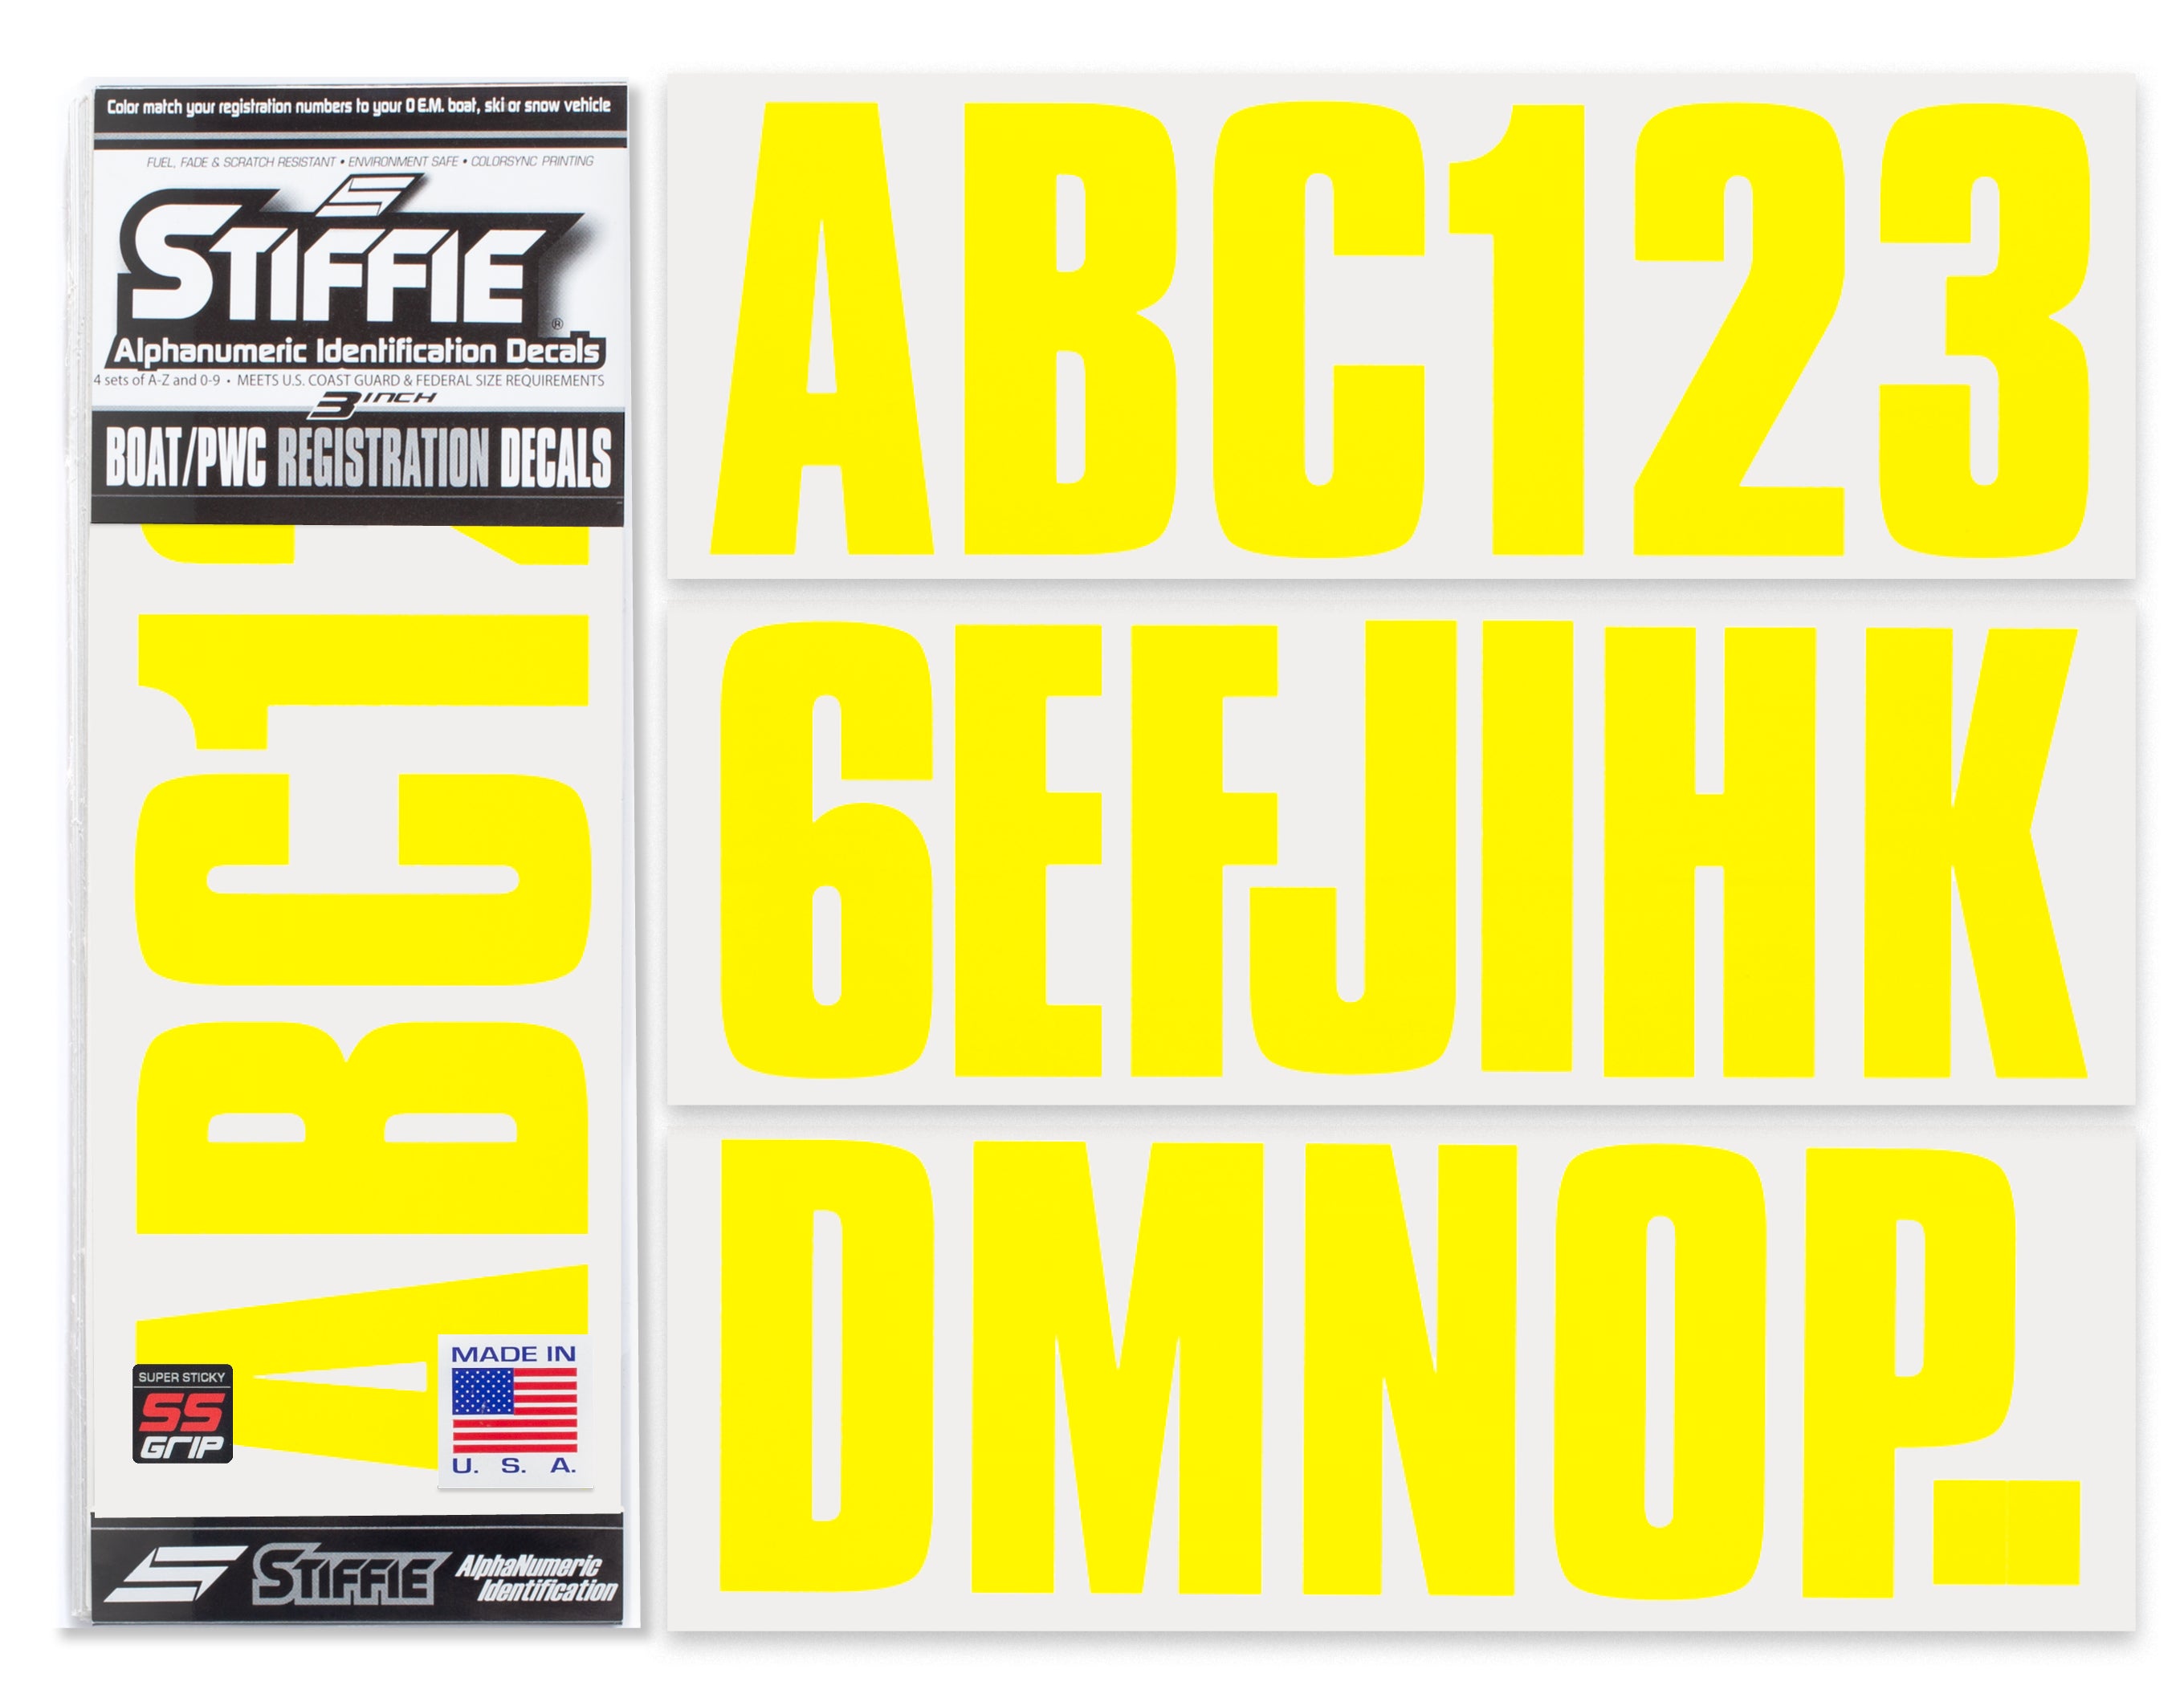 STIFFIE Uniline Yellow Crush Super Sticky 3" Alpha Numeric Registration Identification Numbers Stickers Decals for Sea-Doo Spark, Inflatable Boats, Ribs, Hypalon/PVC, PWC and Boats